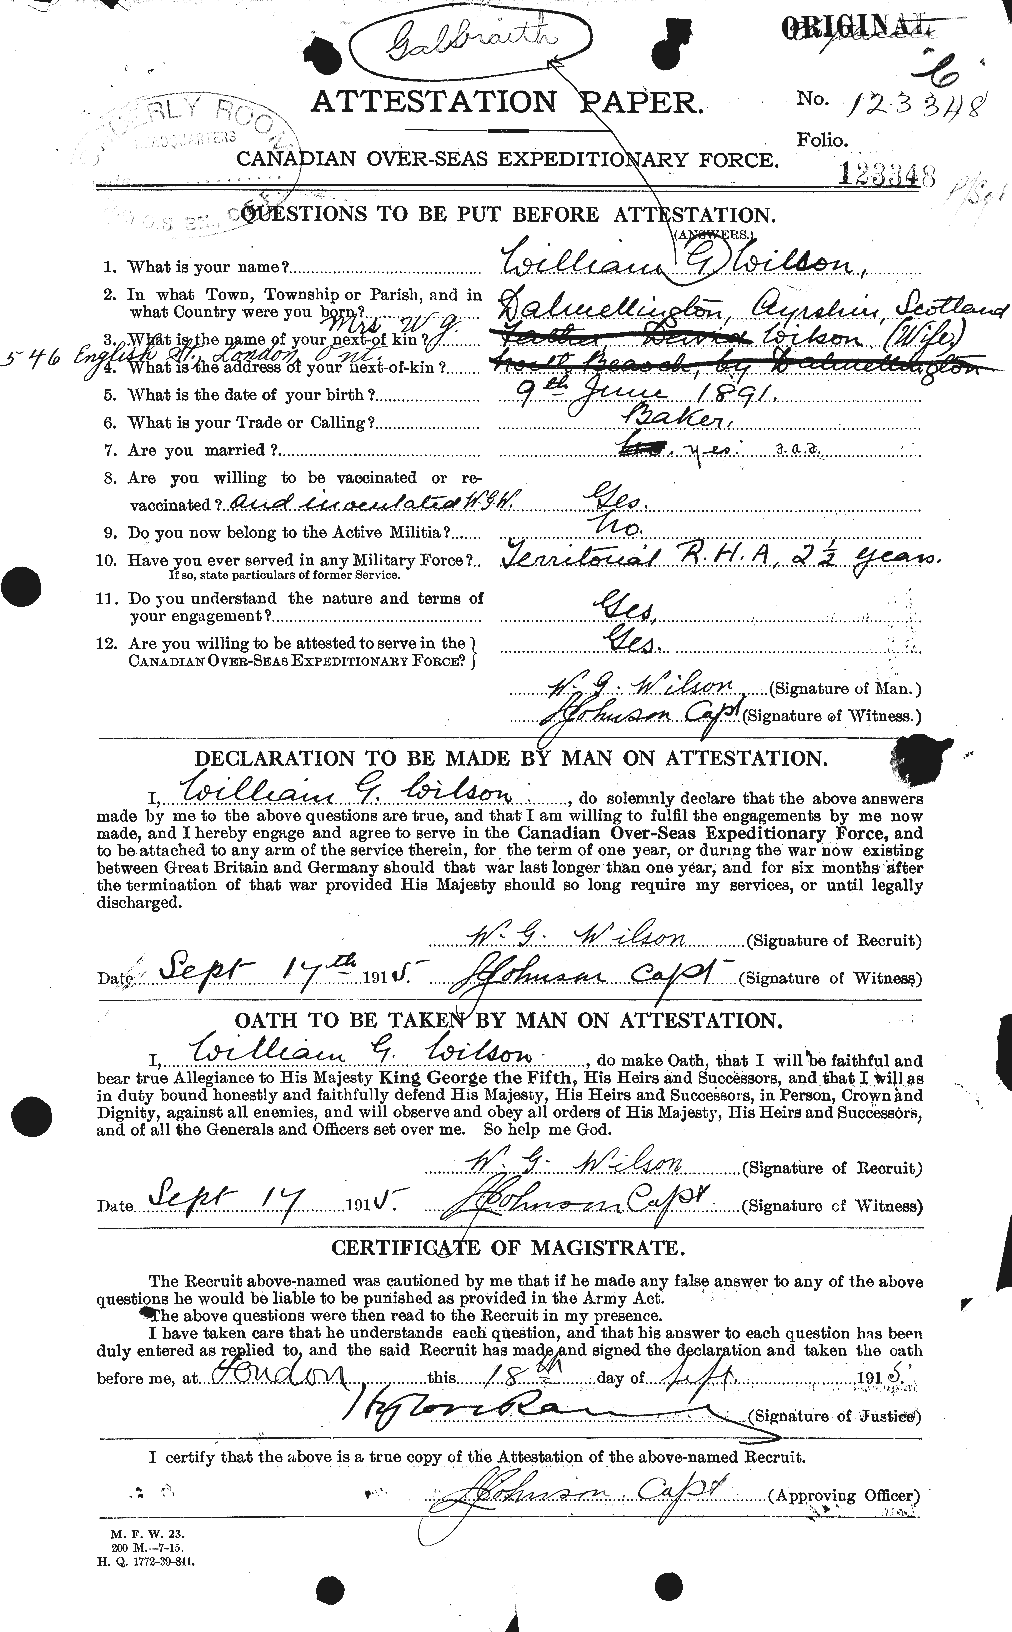 Personnel Records of the First World War - CEF 681997a